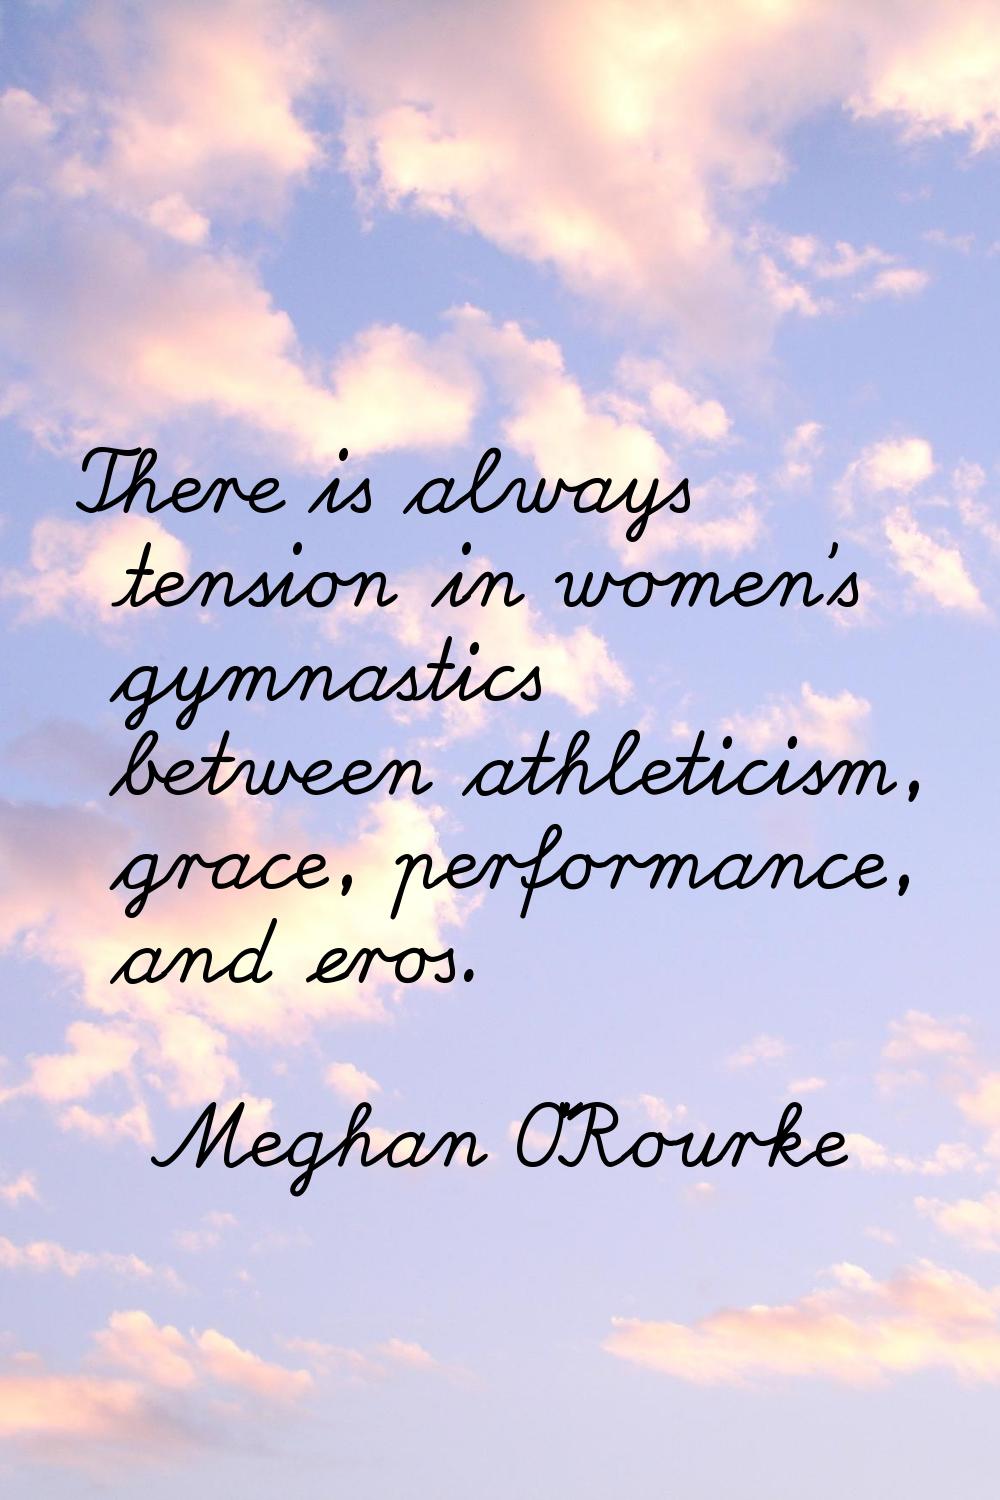 There is always tension in women's gymnastics between athleticism, grace, performance, and eros.